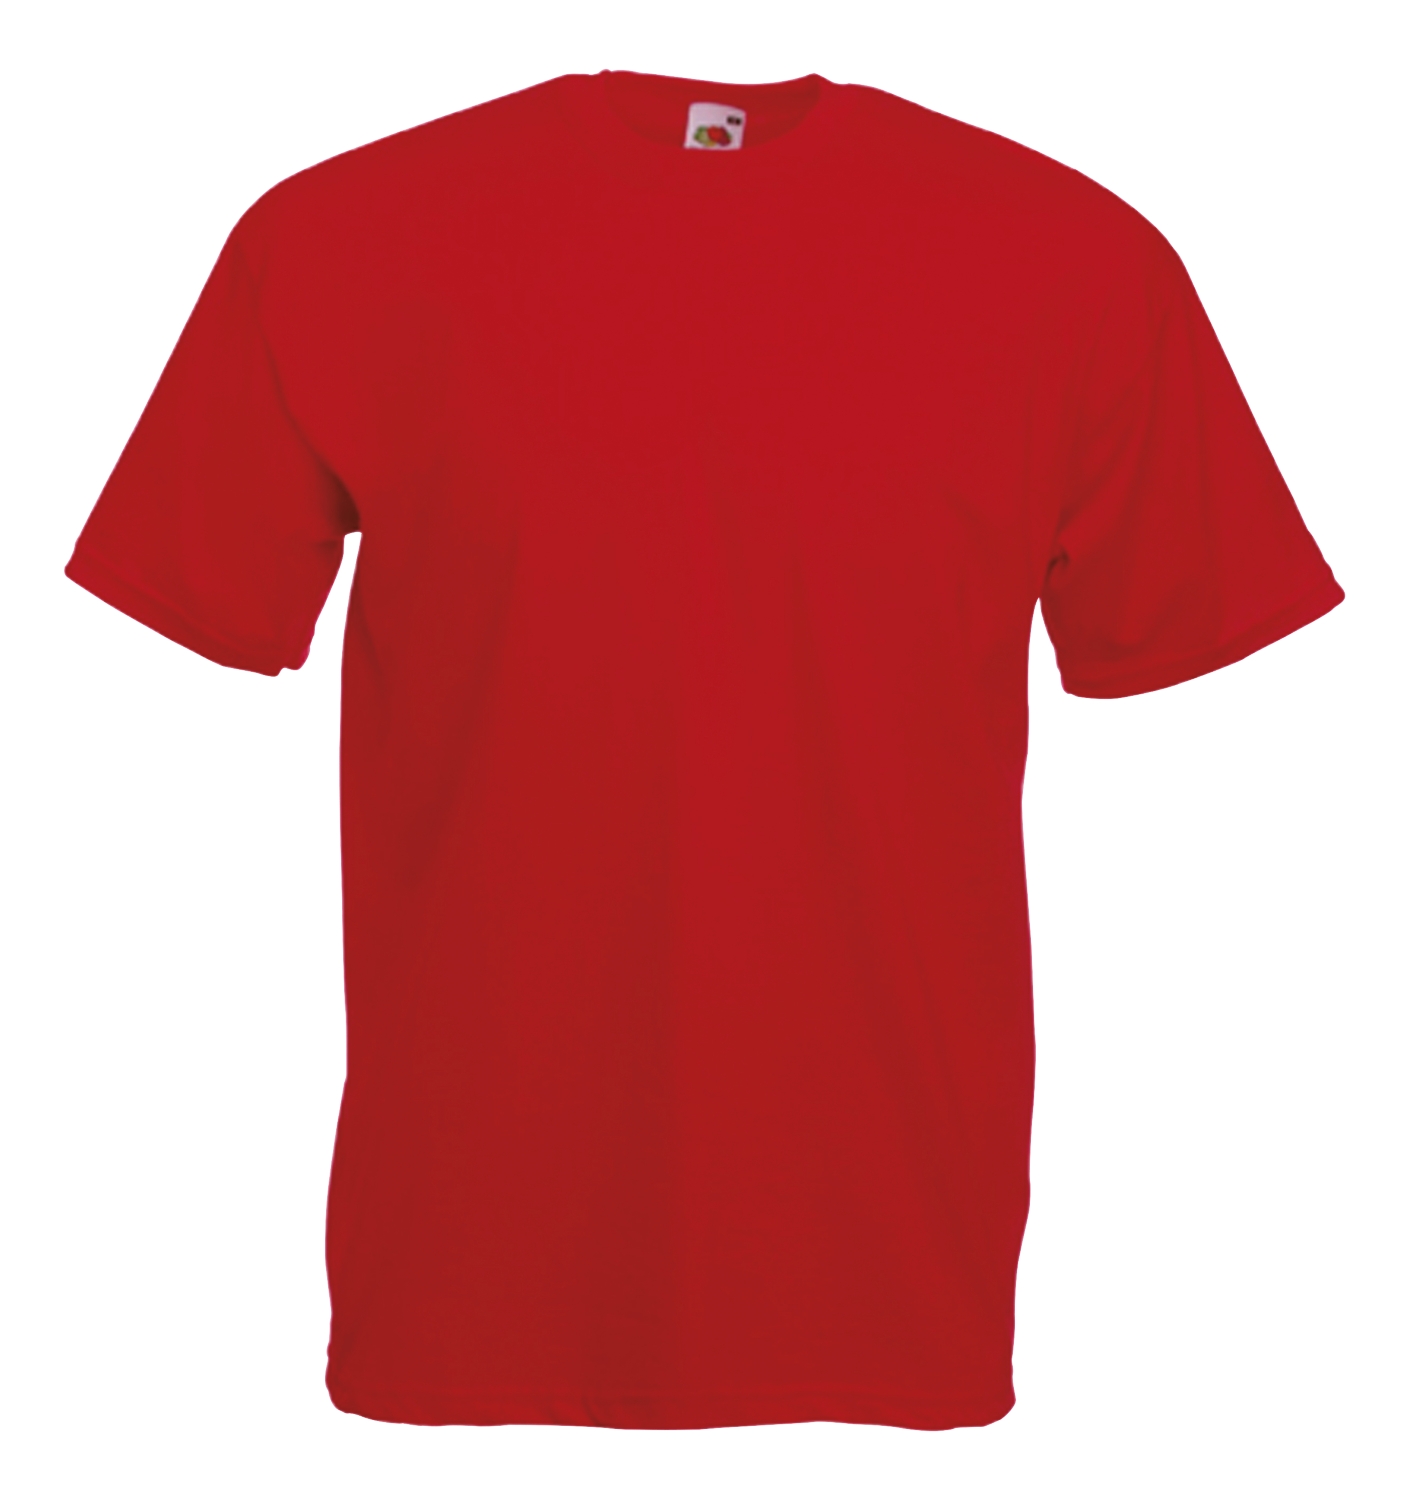  Tee-shirt Value-Weight - Rouge 